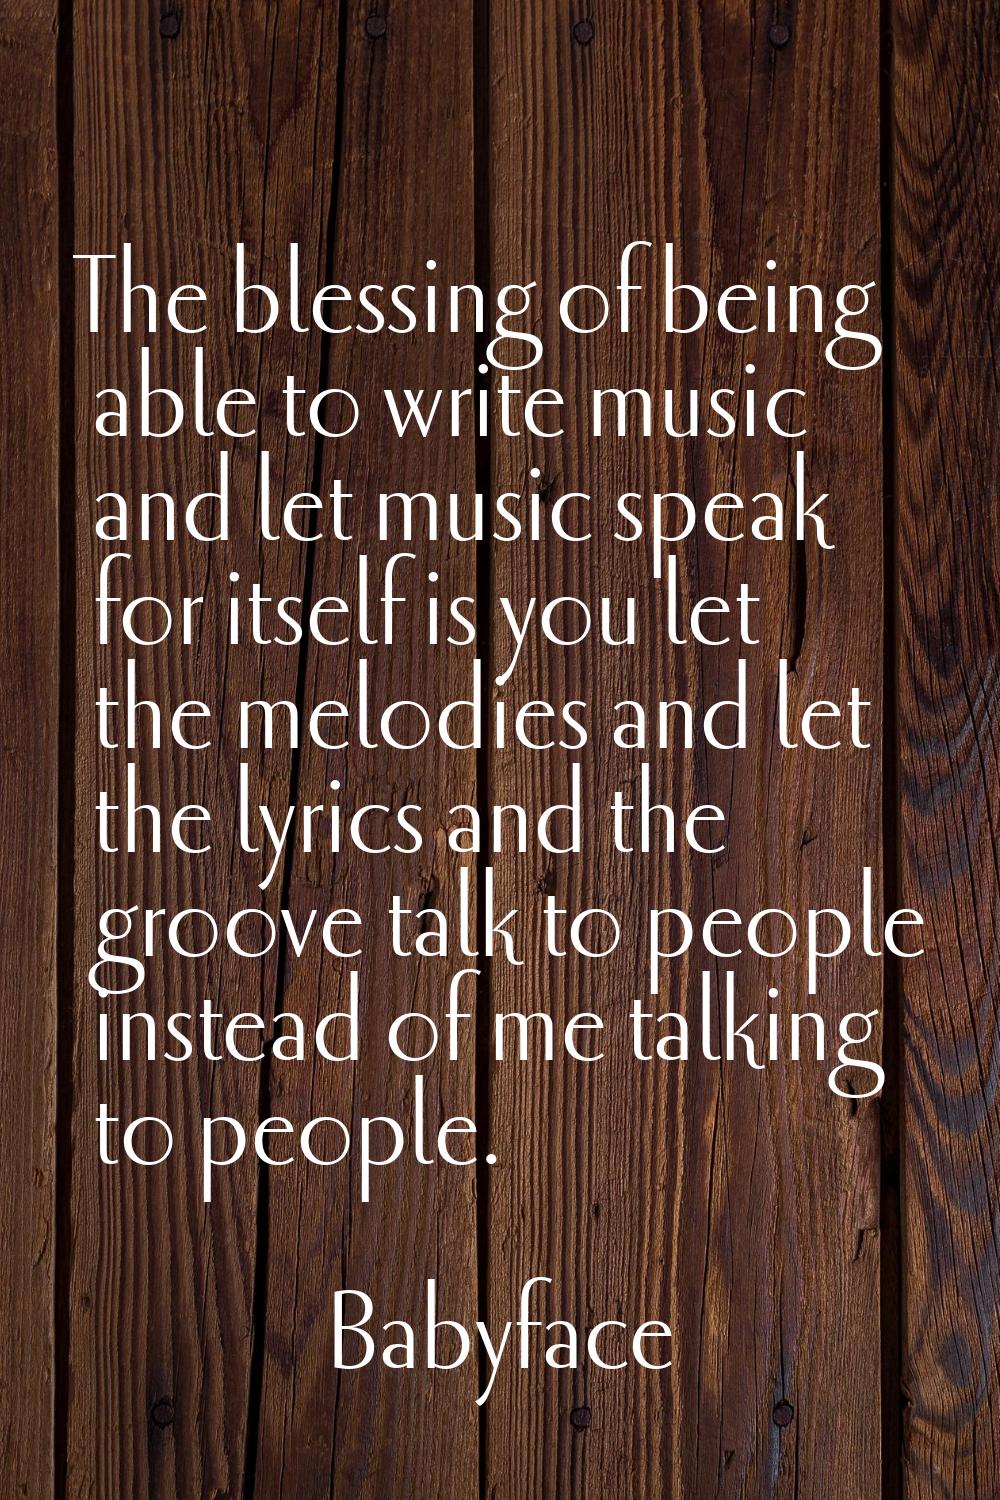 The blessing of being able to write music and let music speak for itself is you let the melodies an